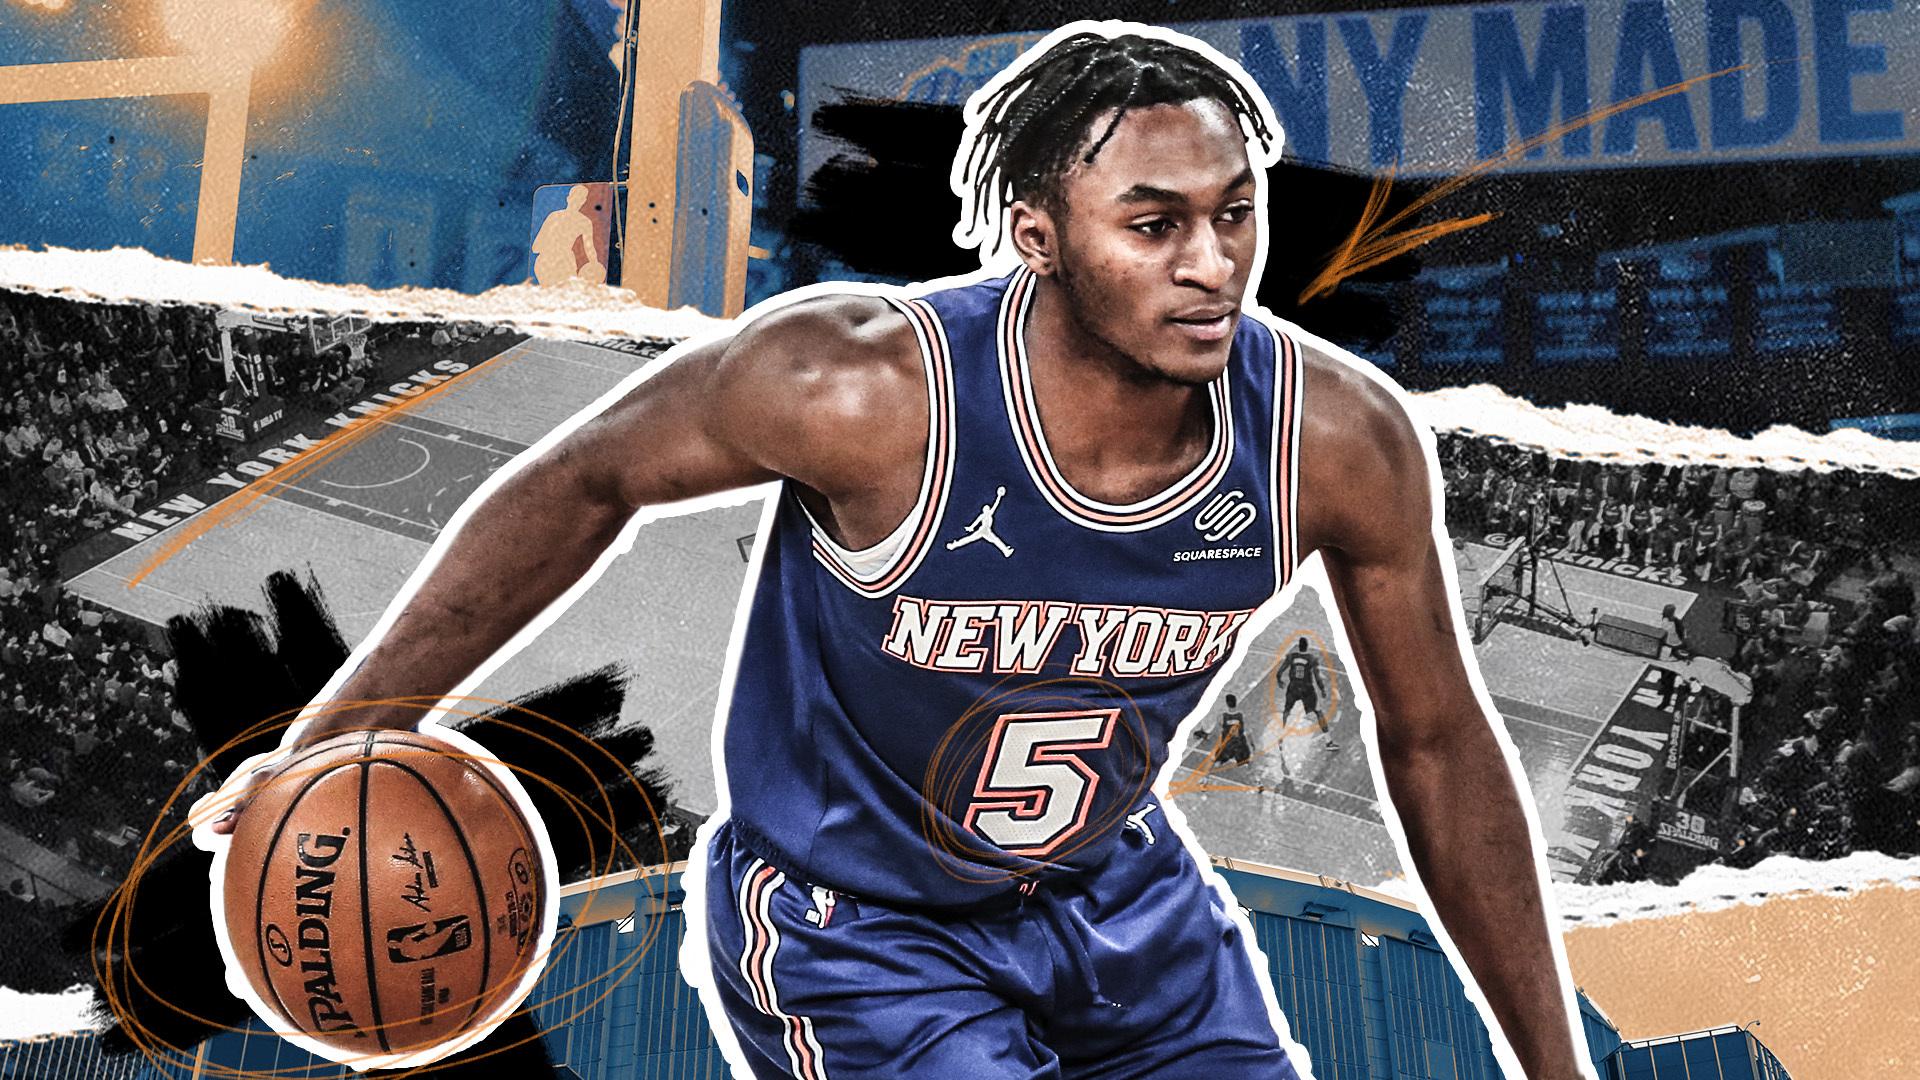 Immanuel Quickley / SNY treated image